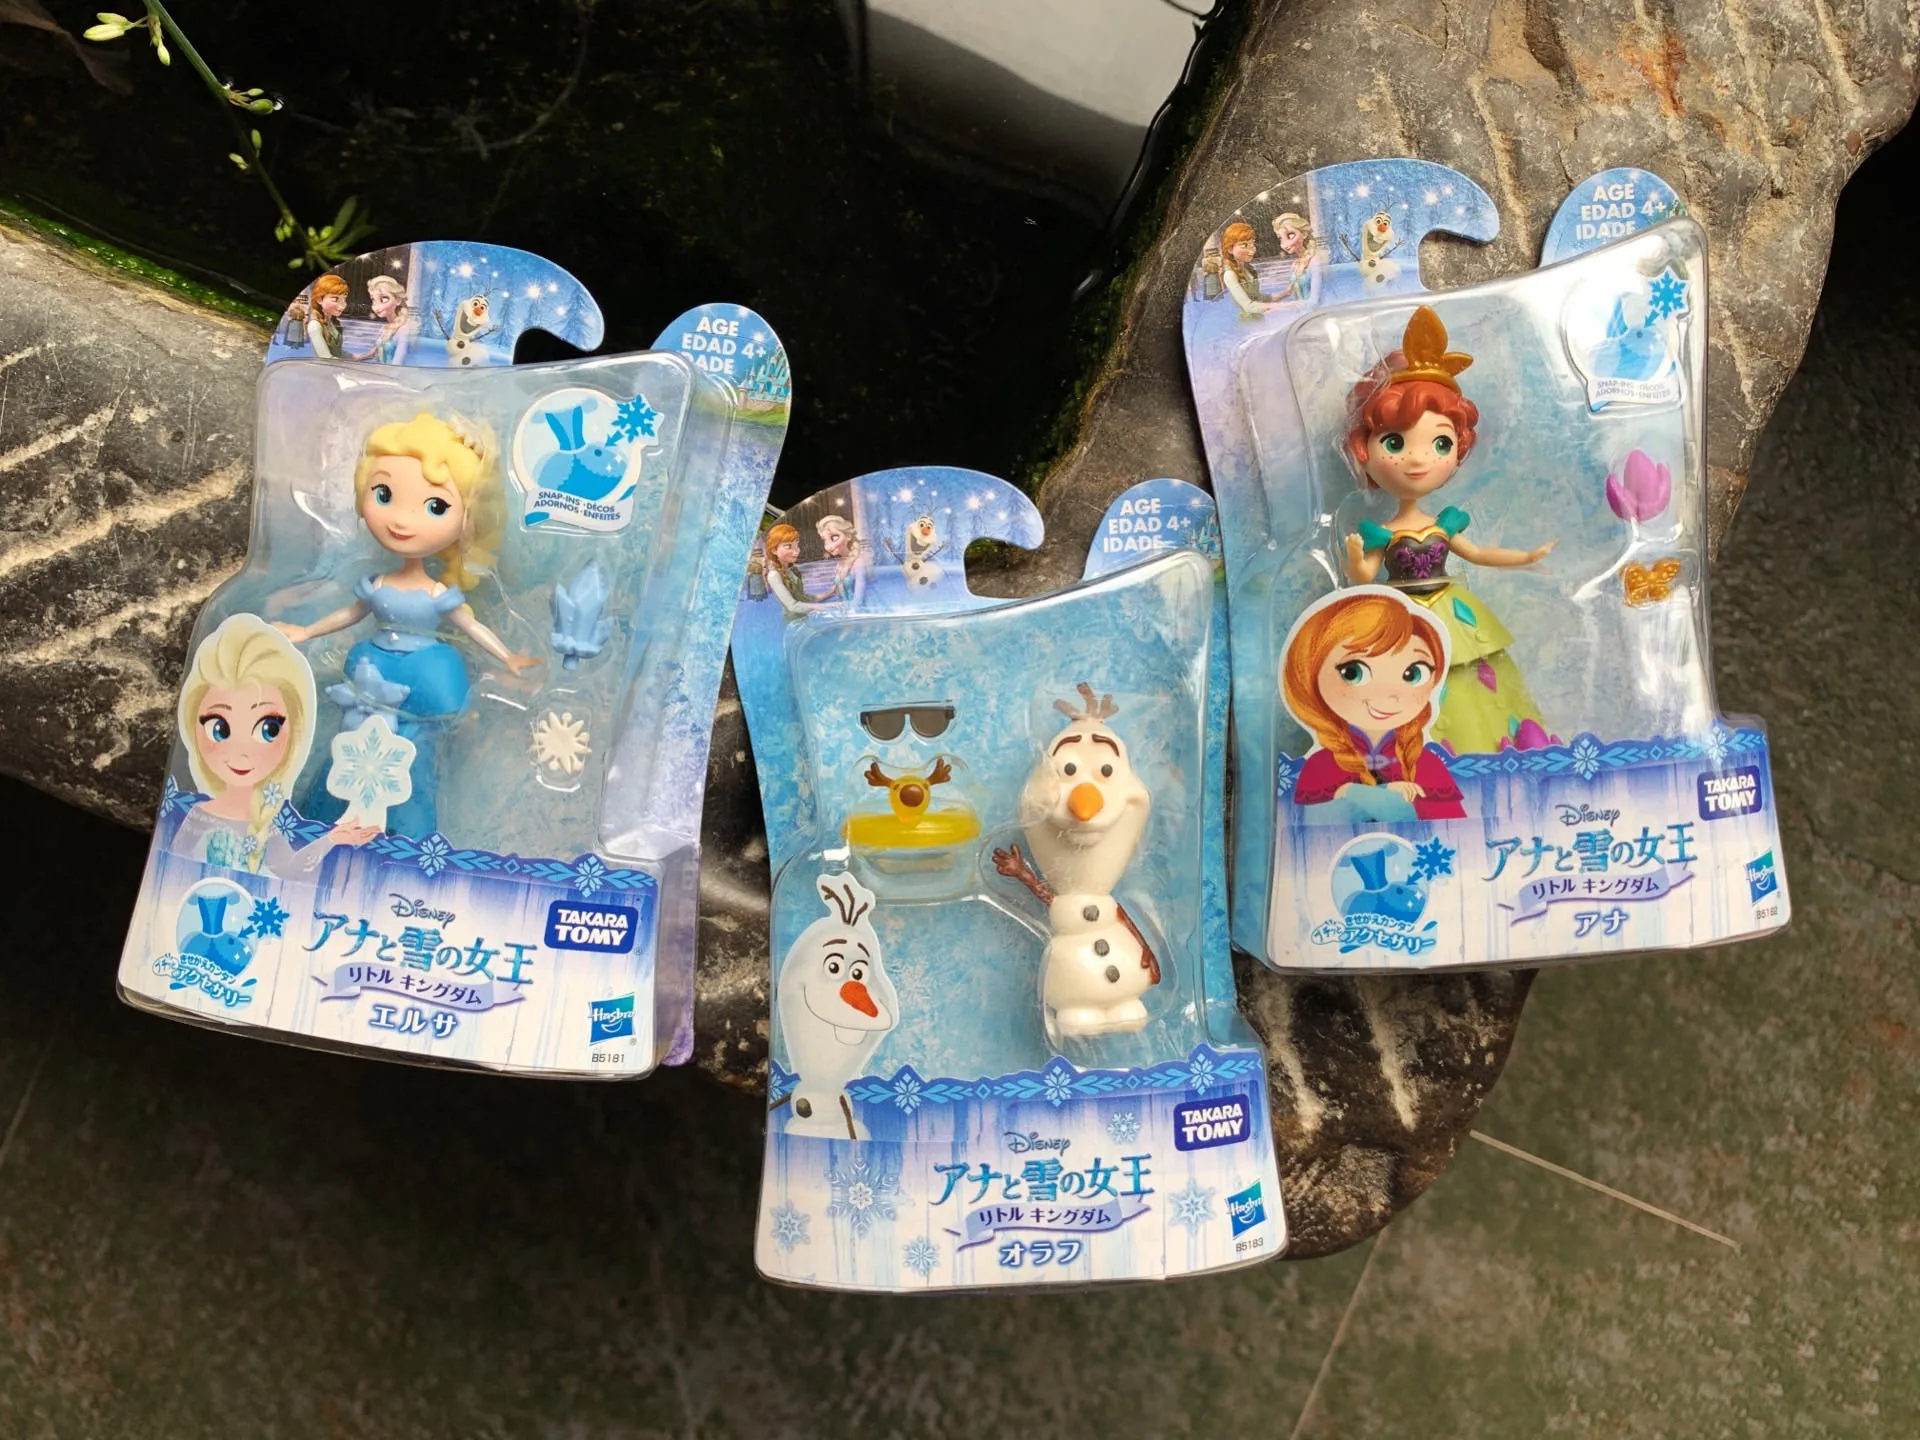 

Disney Frozen Little Kingdom Princess Elsa Anna Olaf Doll Gifts Toy Model Anime Figures Collect Ornaments